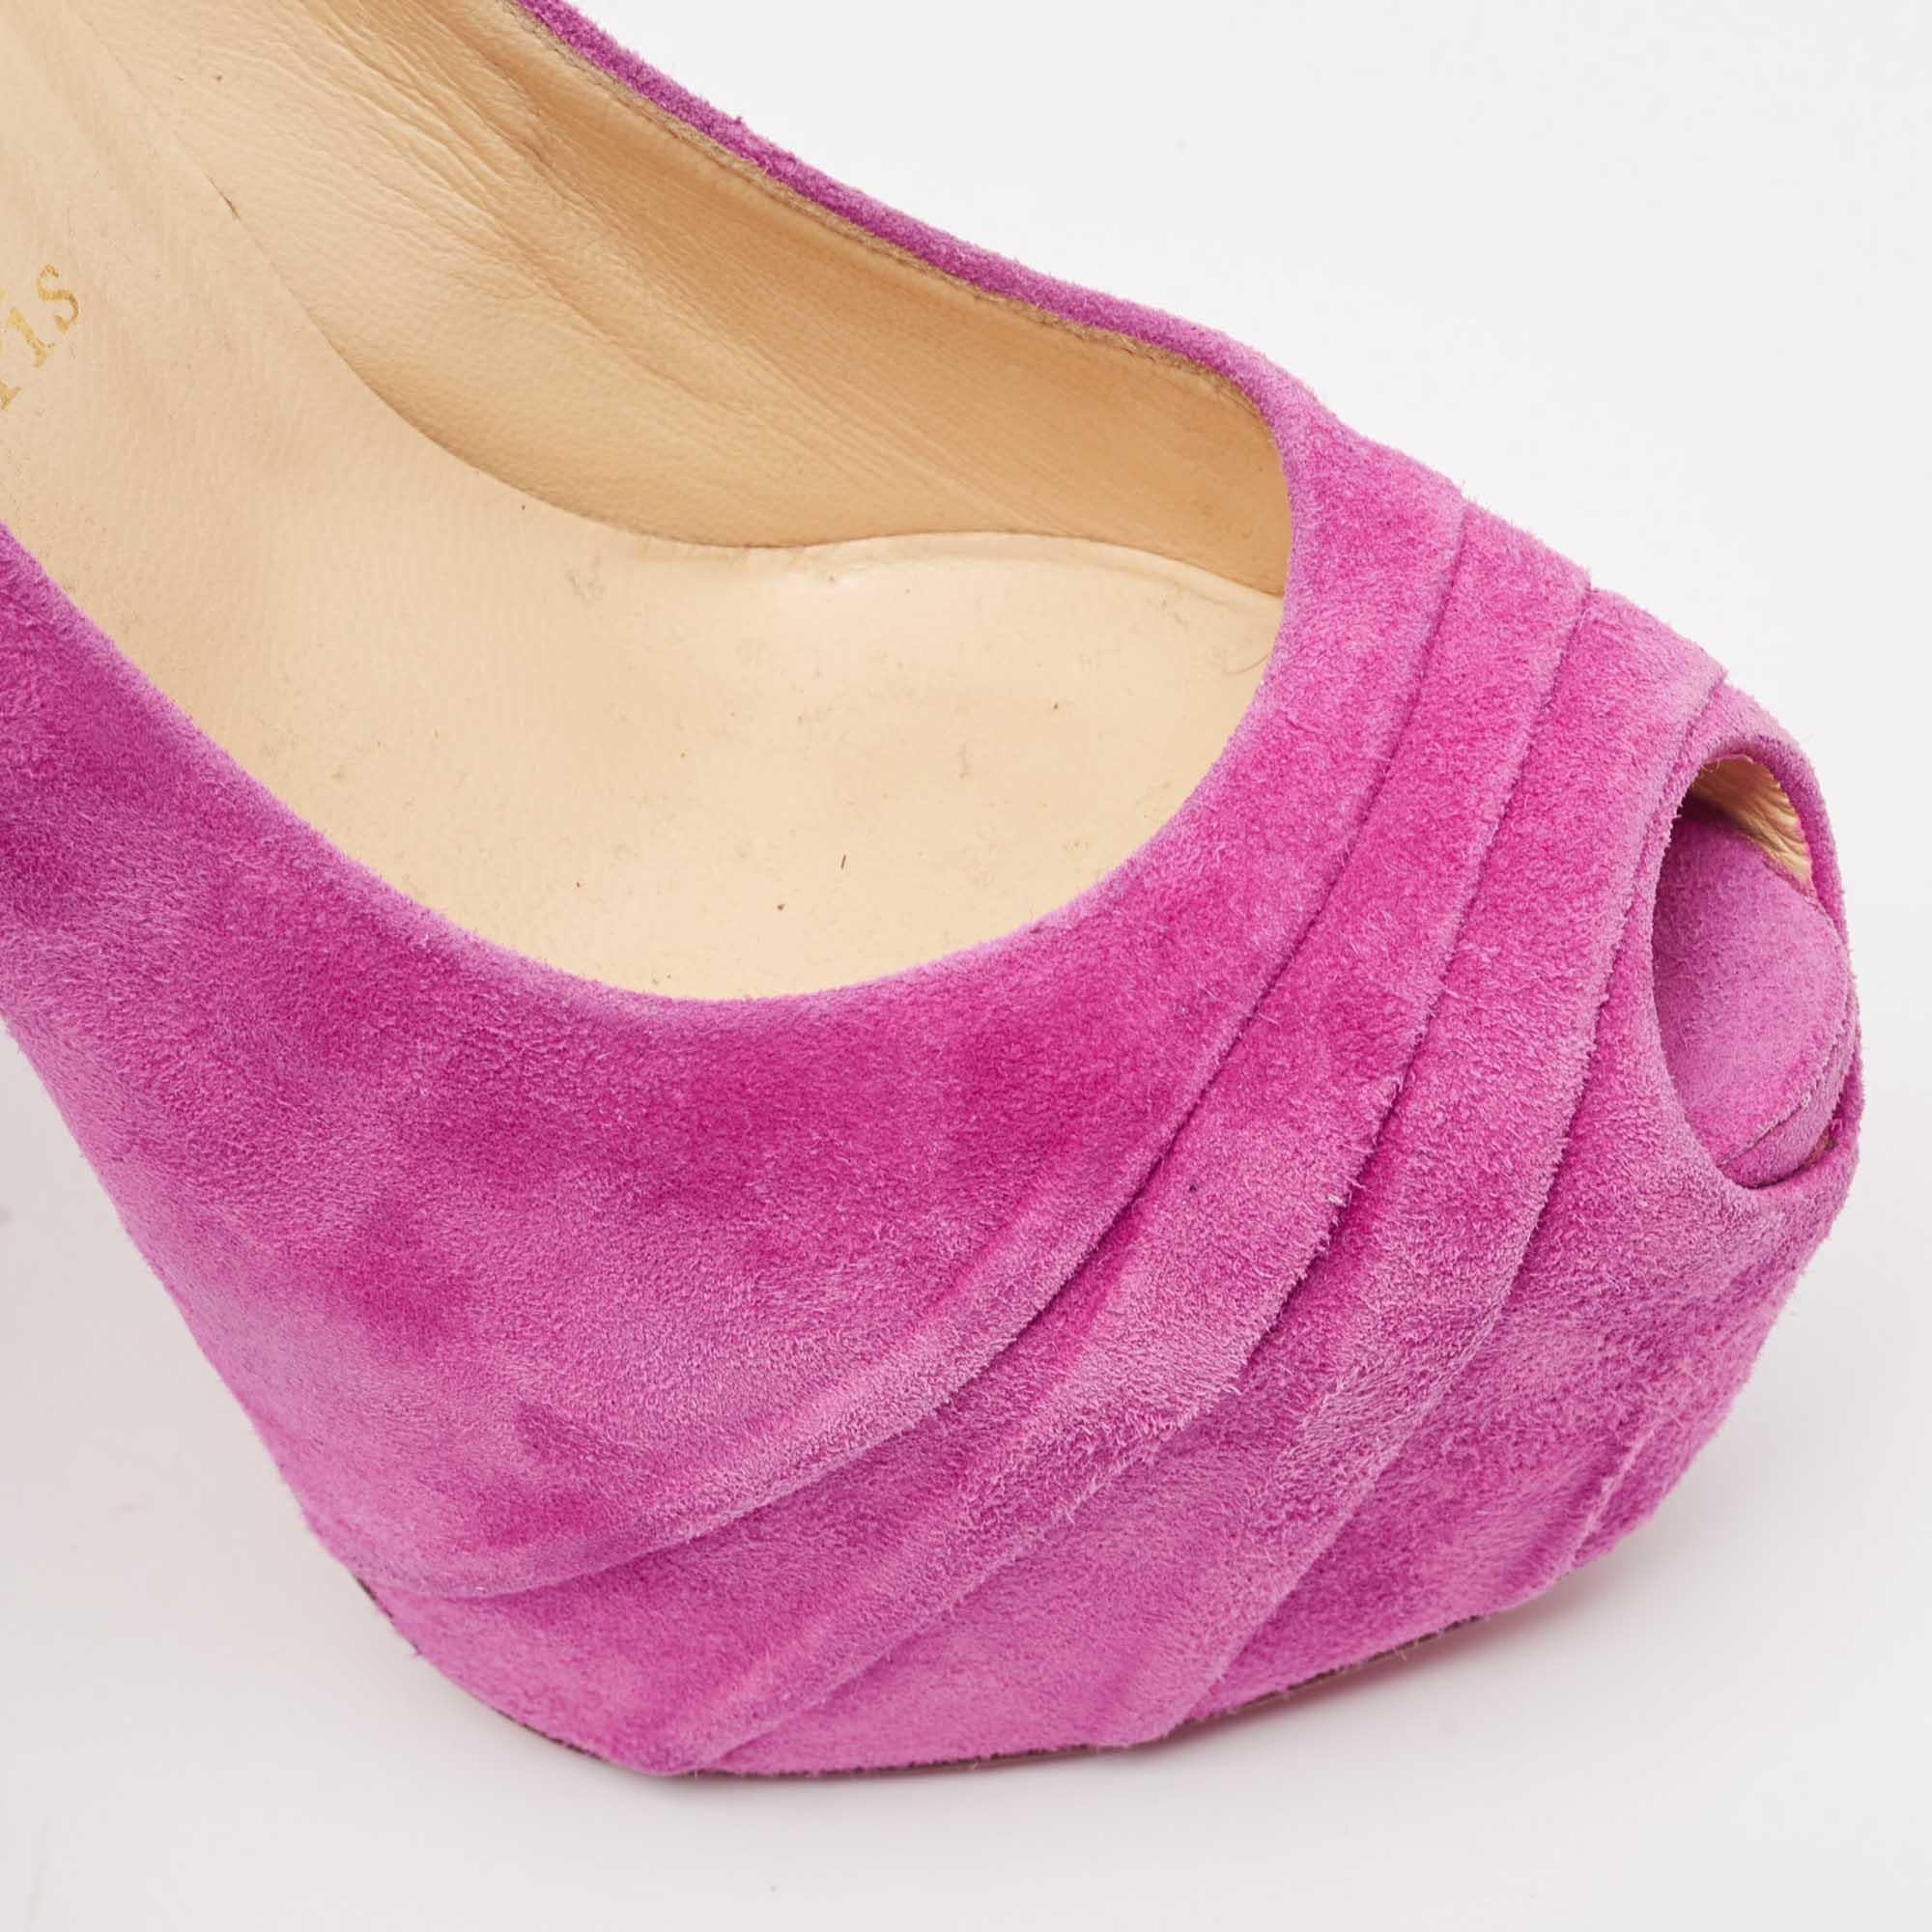 Christian Louboutin Pink Suede Drapesse Peep Toe Pumps Size 38 For Sale 2